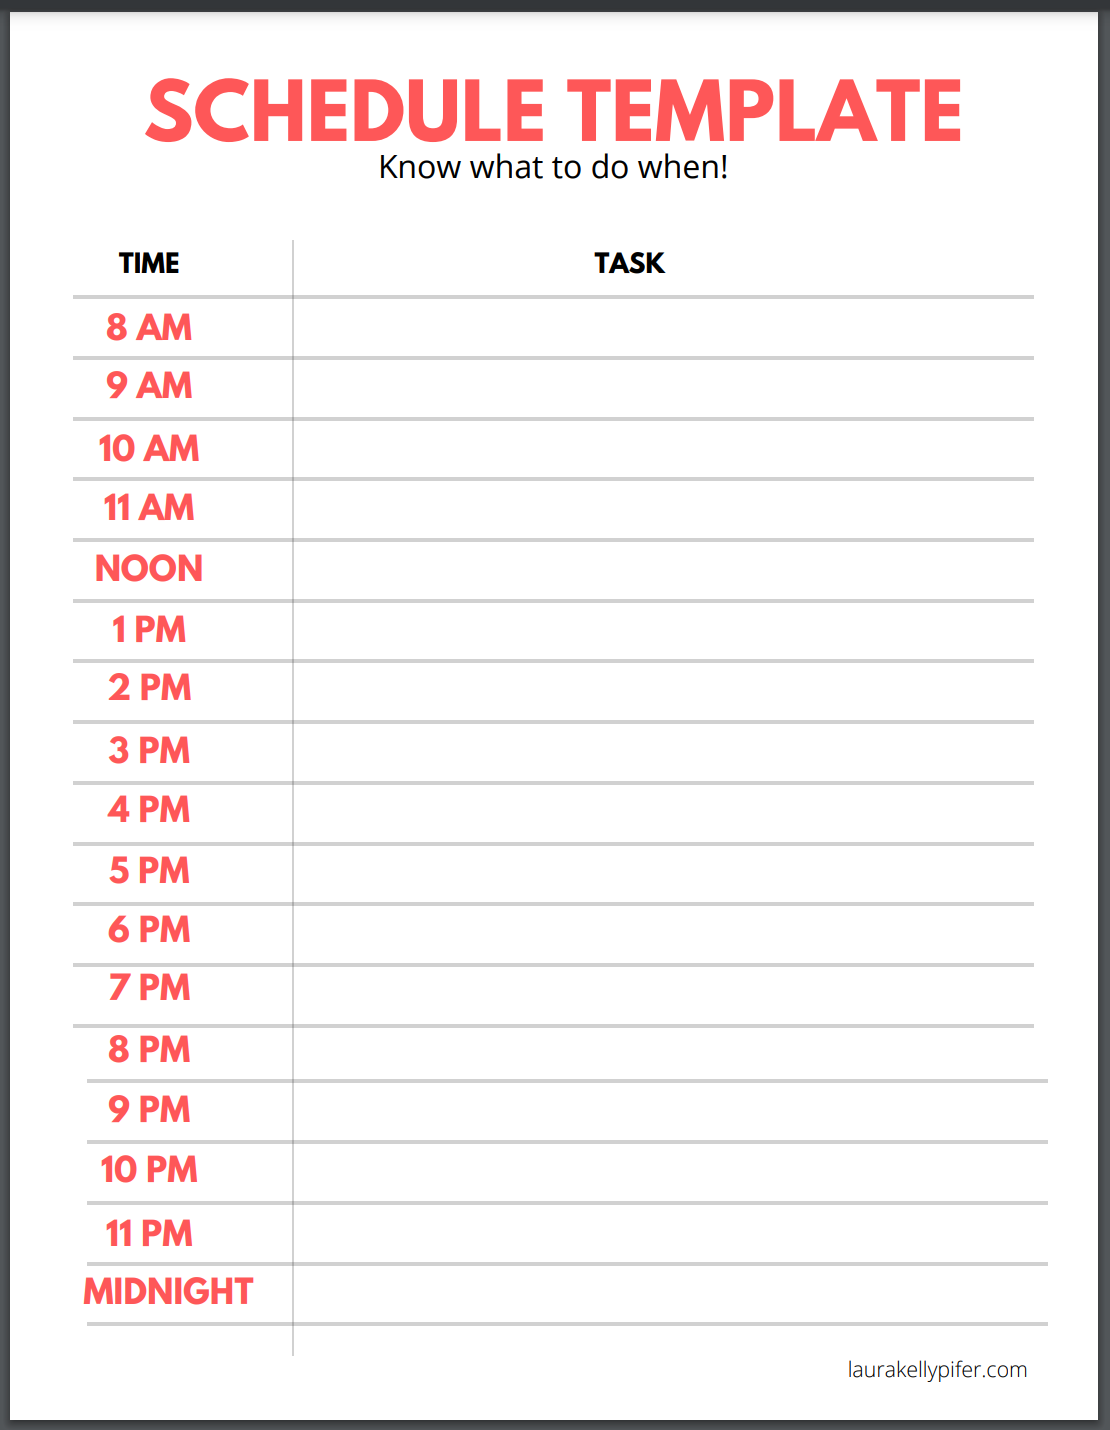 Know What To Do When Daily Schedule Appointment Template/Log/Tracker Printable